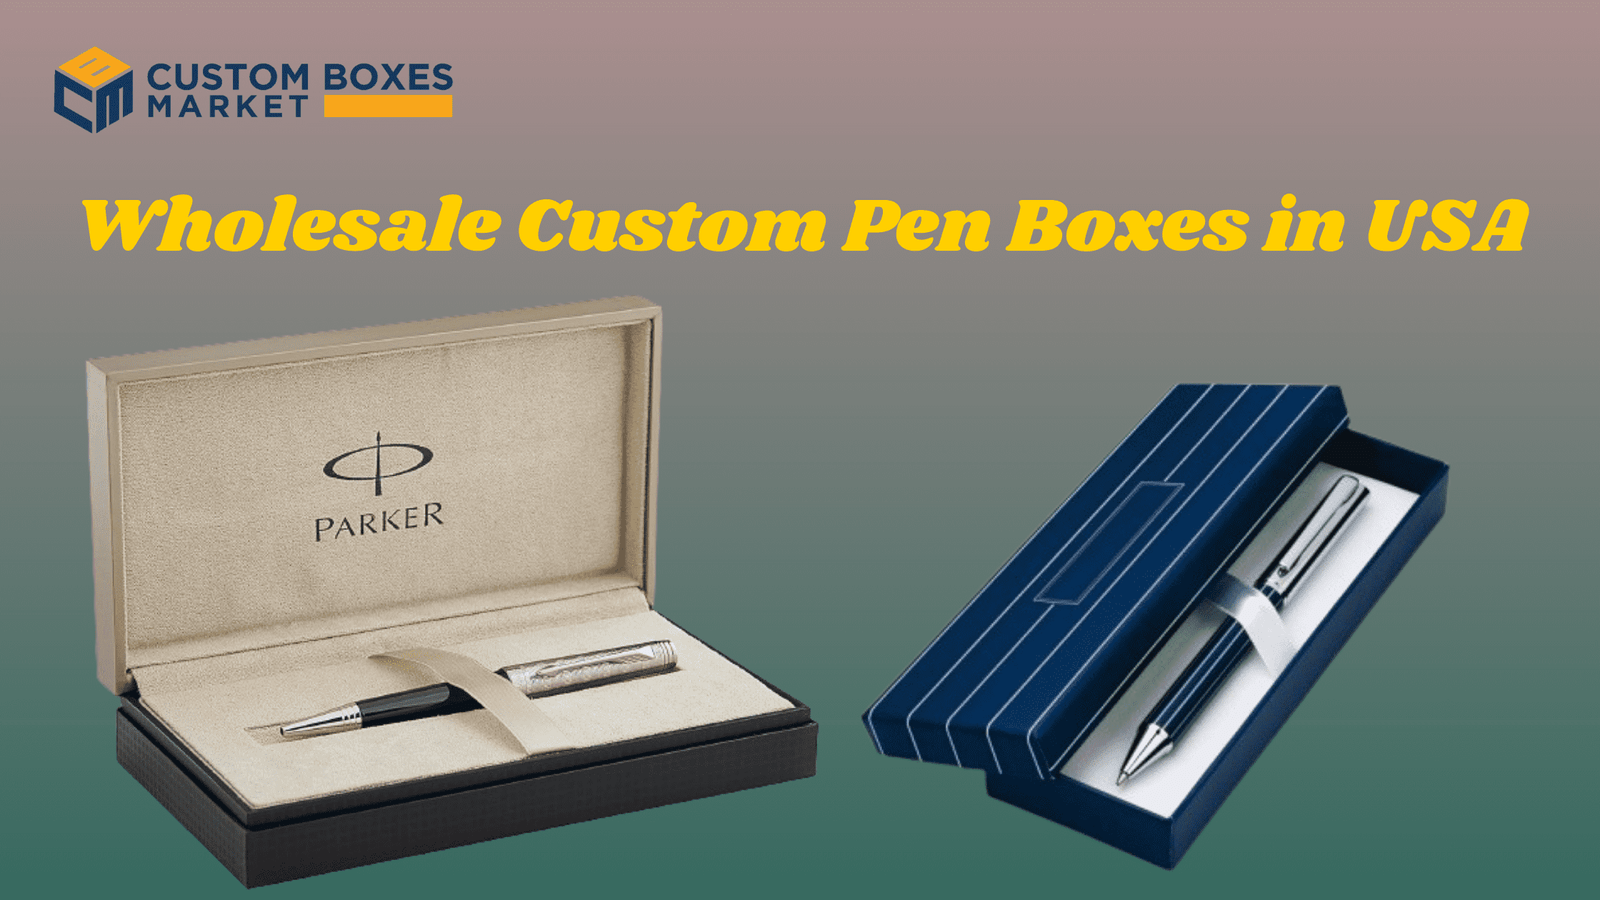 Custom Pen Boxes Give New Look to Your Business